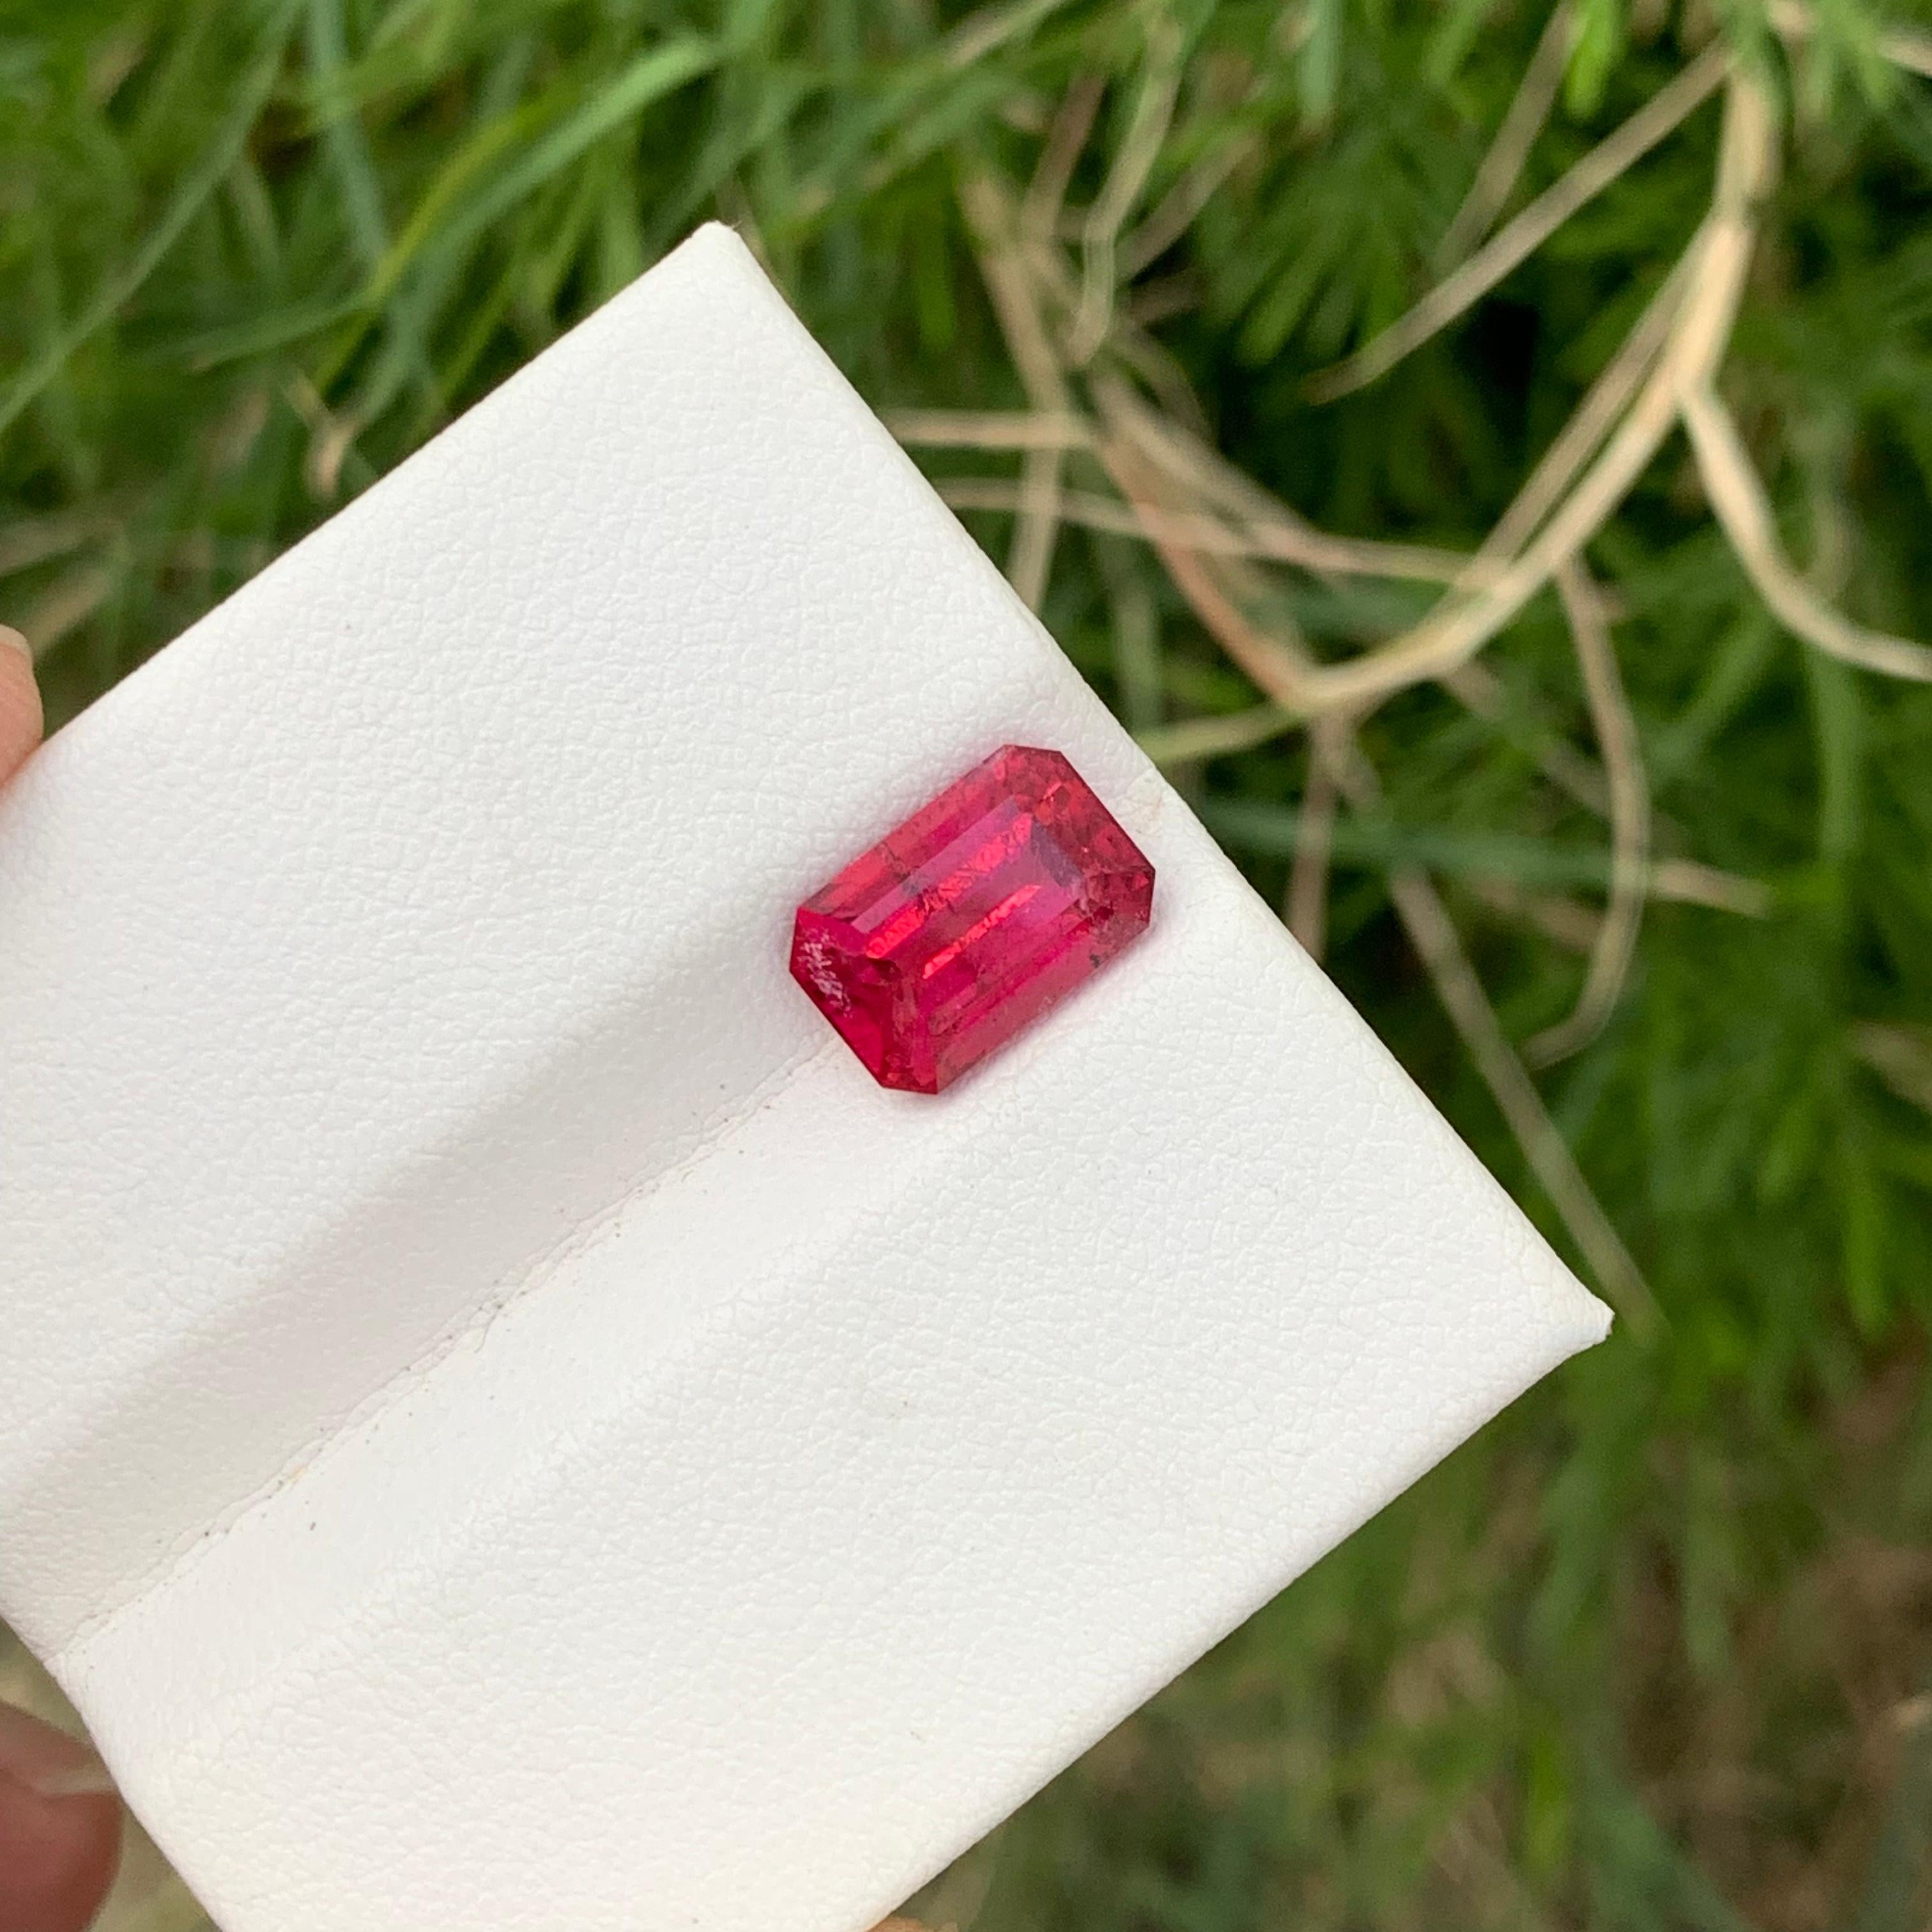 Arts and Crafts 3.20 Carats Faceted Natural Rubellite Tourmaline Gemstone Emerald Shape For Sale